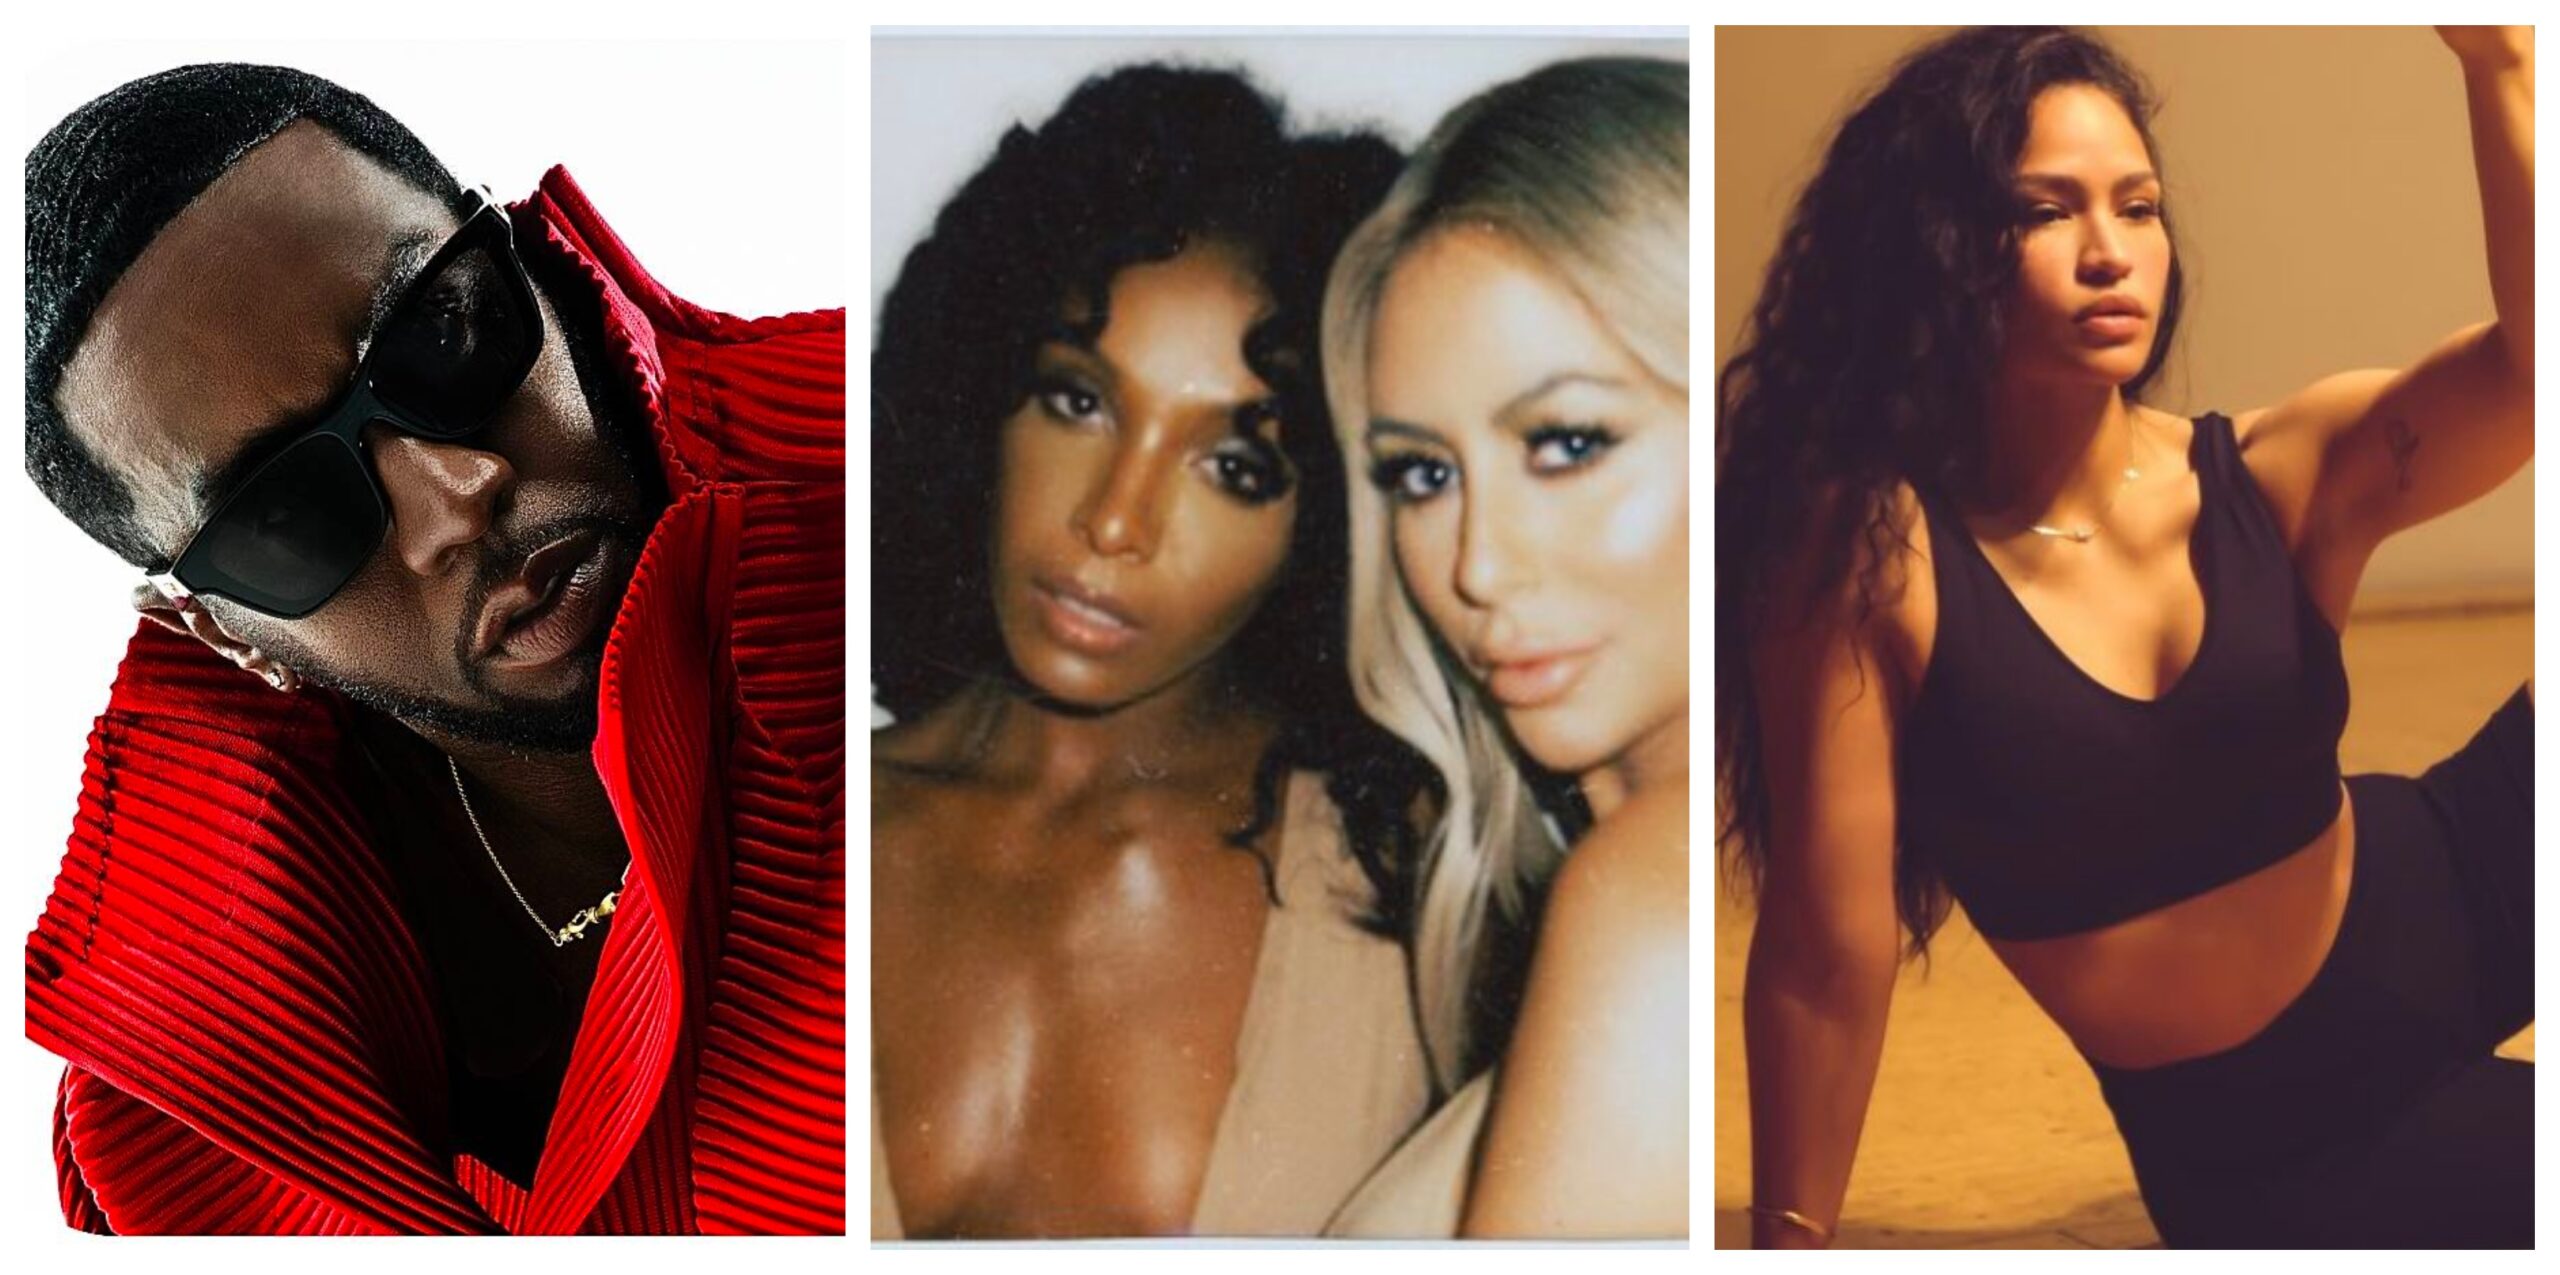 Danity Kane Stars React to Cassie’s Bombshell Claims That Diddy Raped & Physically Abused Her